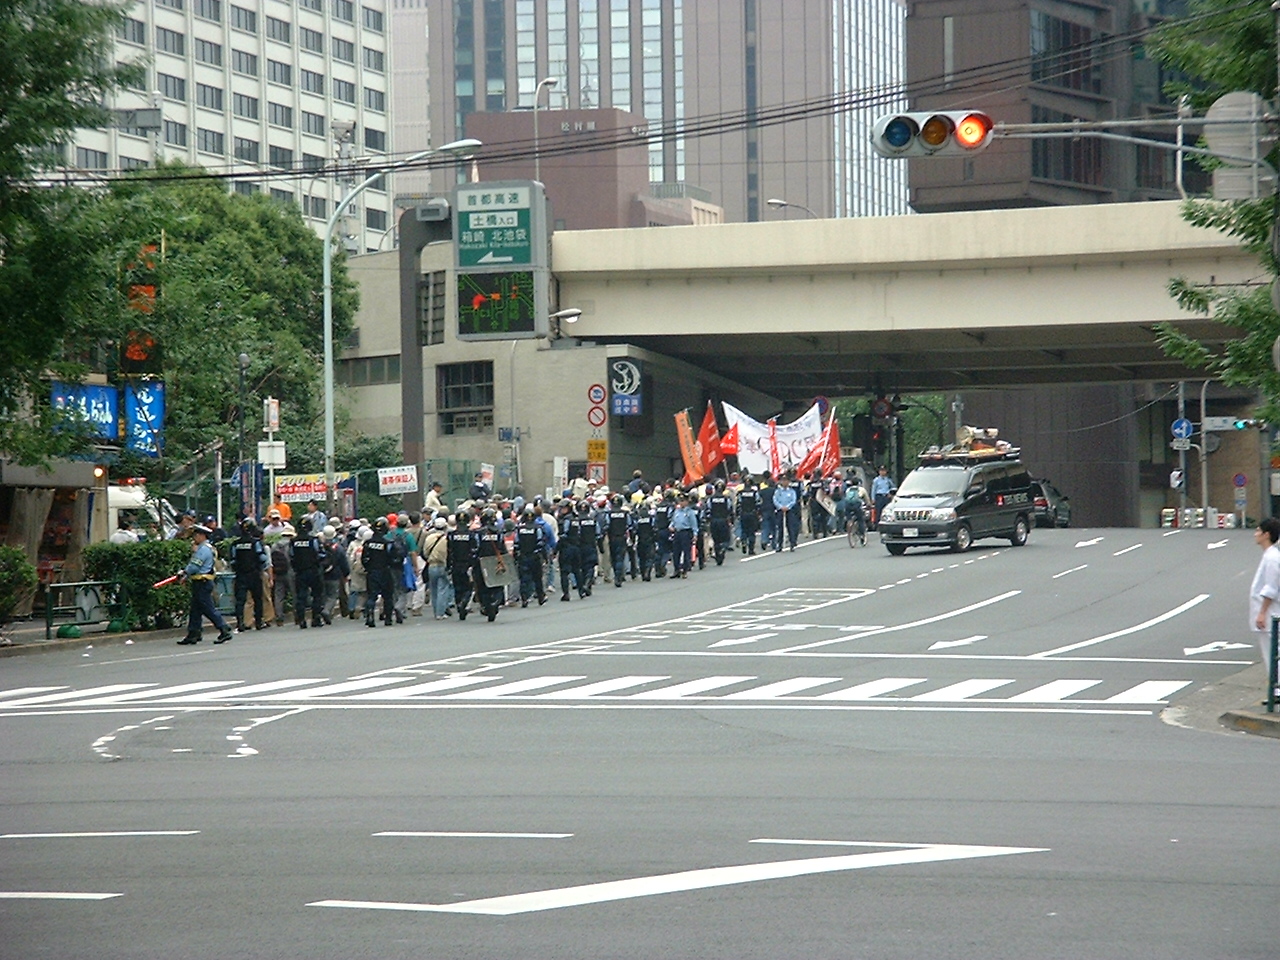 police officers escort the line of protesters